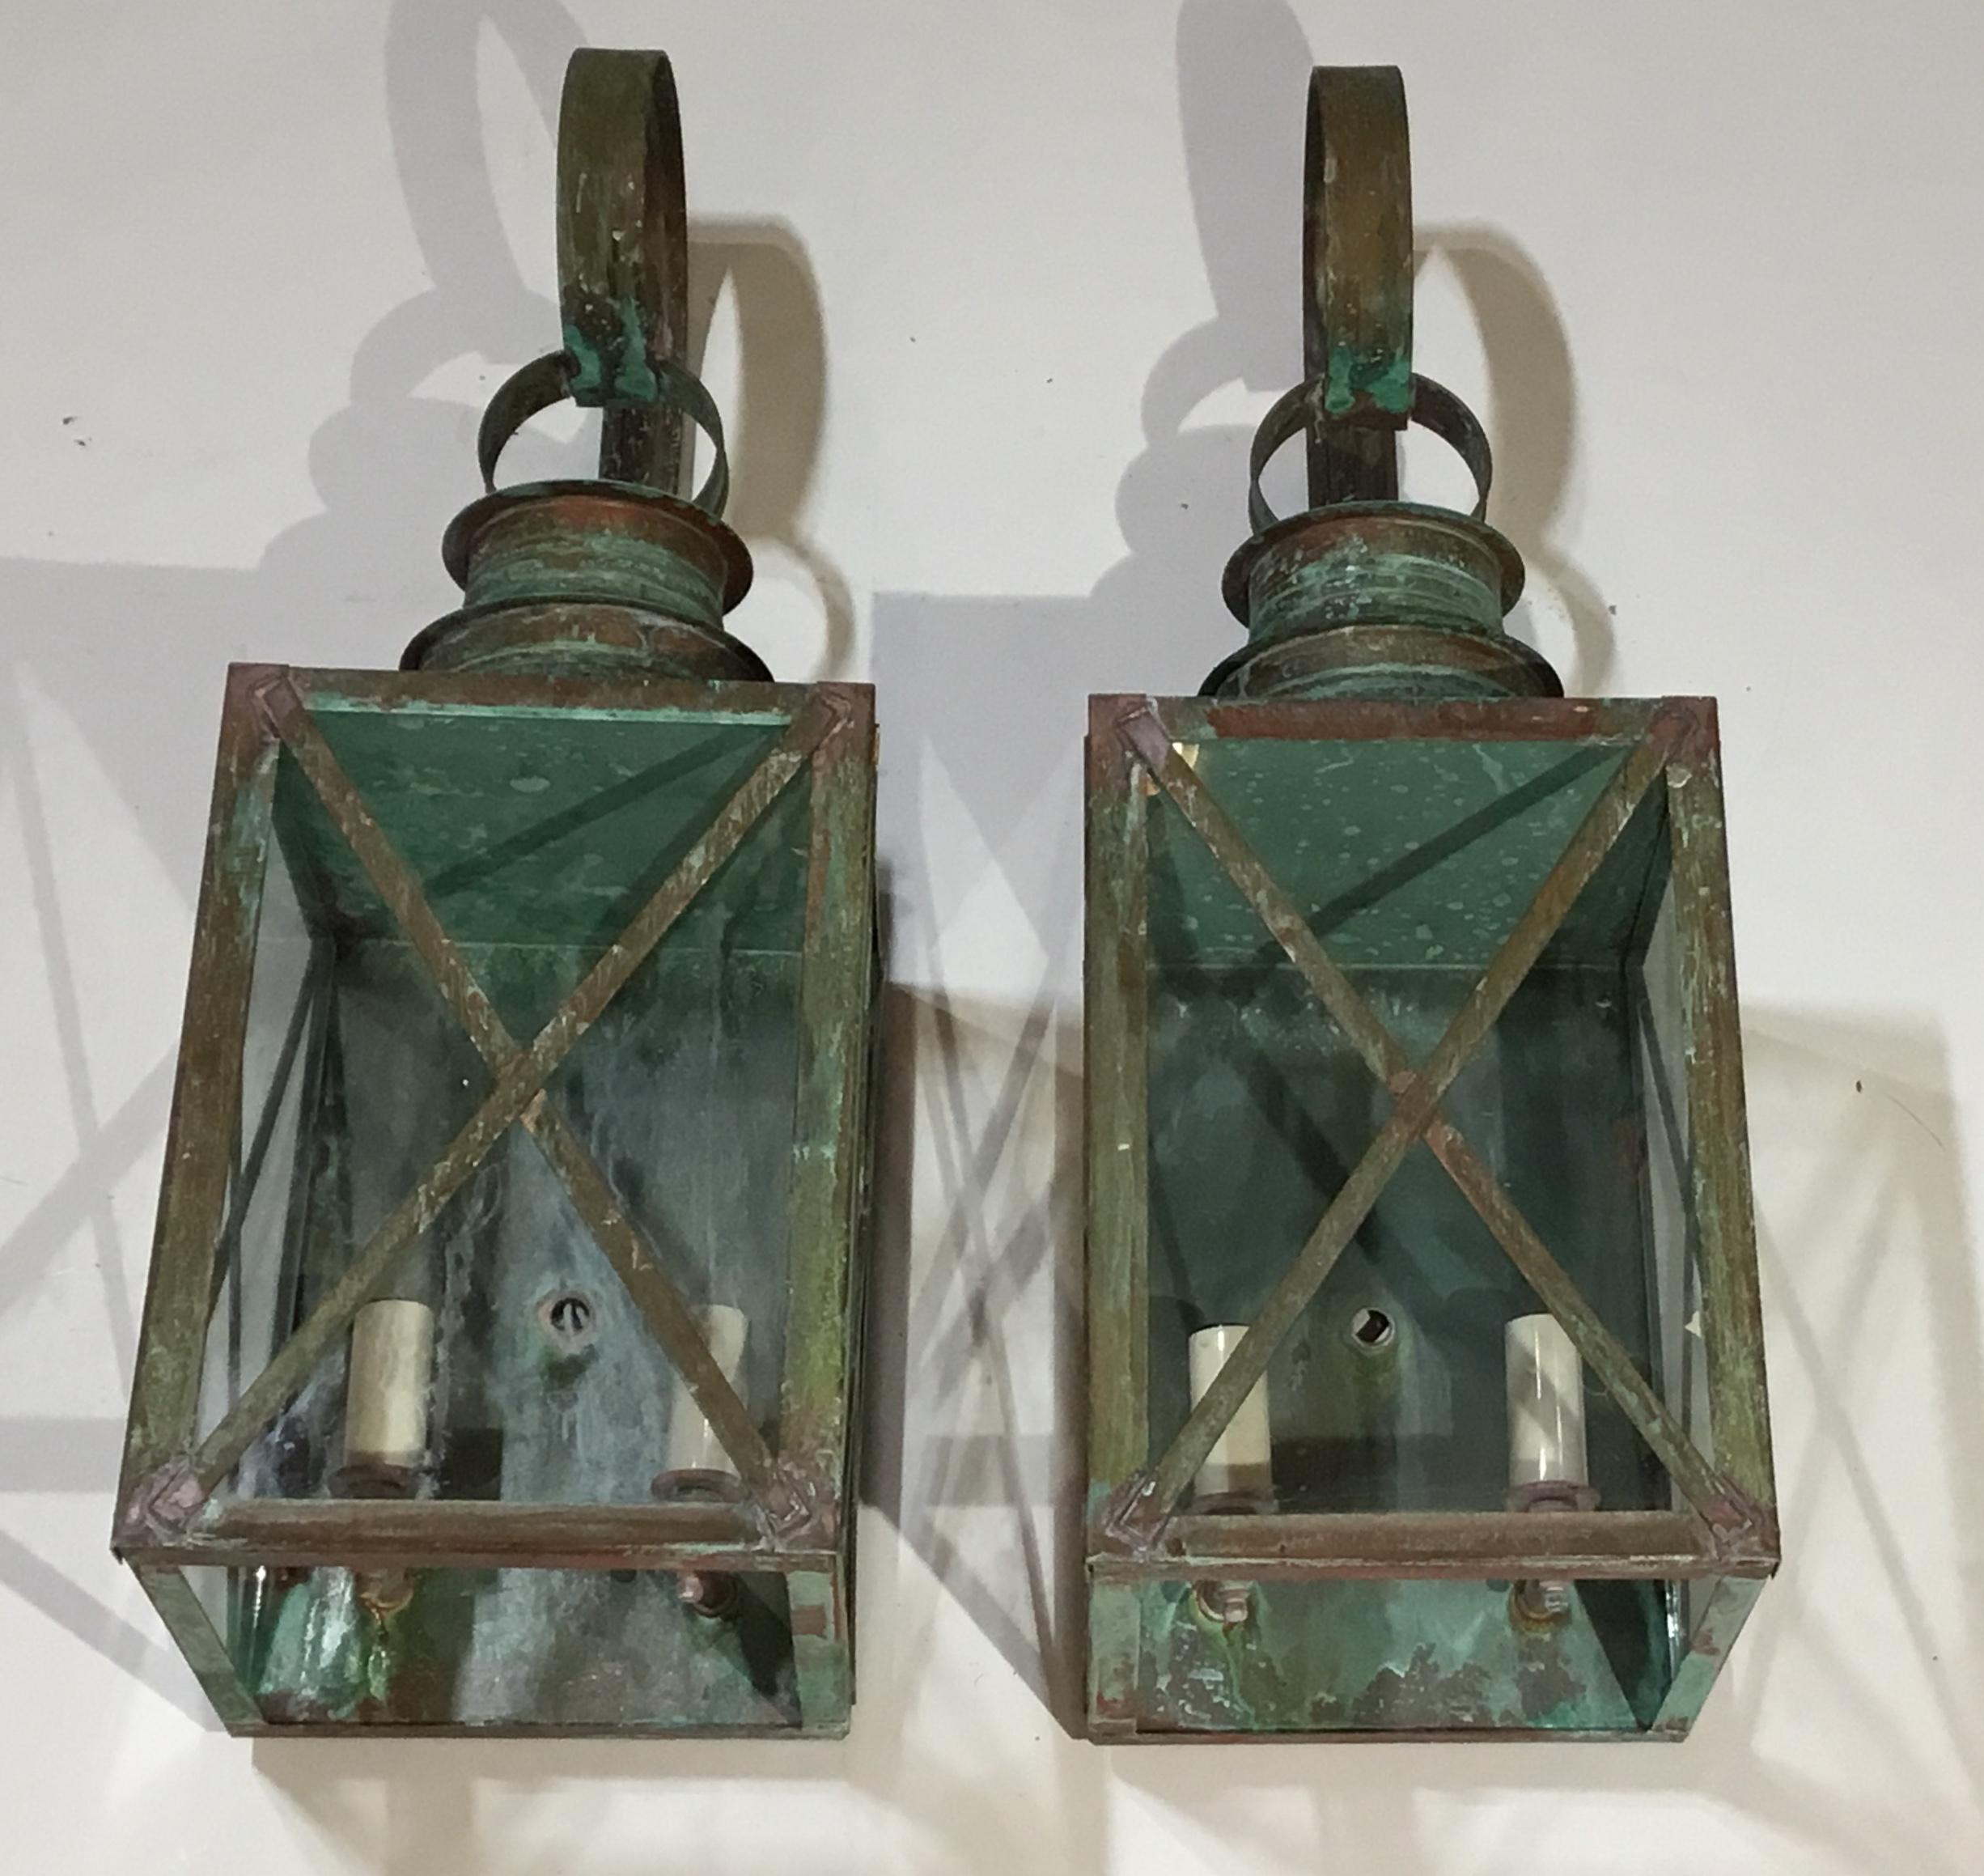 Contemporary Pair of Wall Hanging Copper Lantern